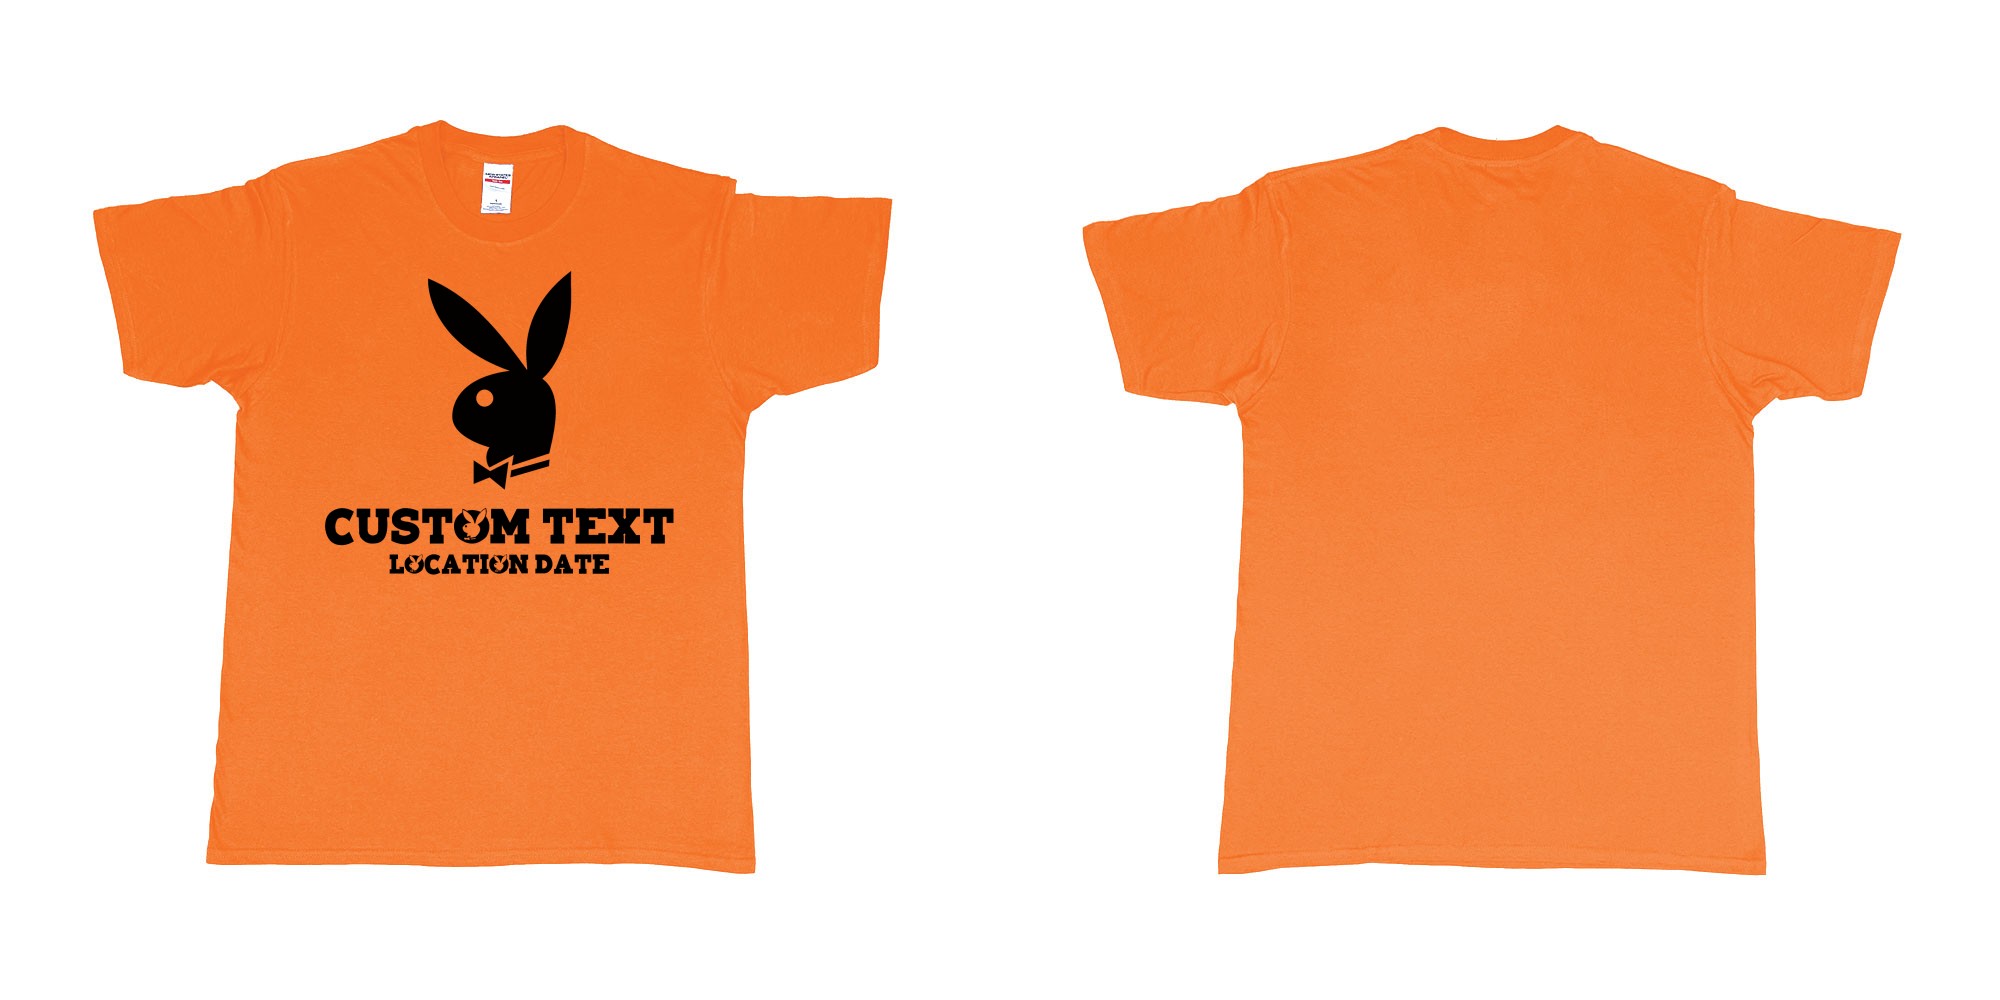 Custom tshirt design playboy playgirl custom text tshirt in fabric color orange choice your own text made in Bali by The Pirate Way